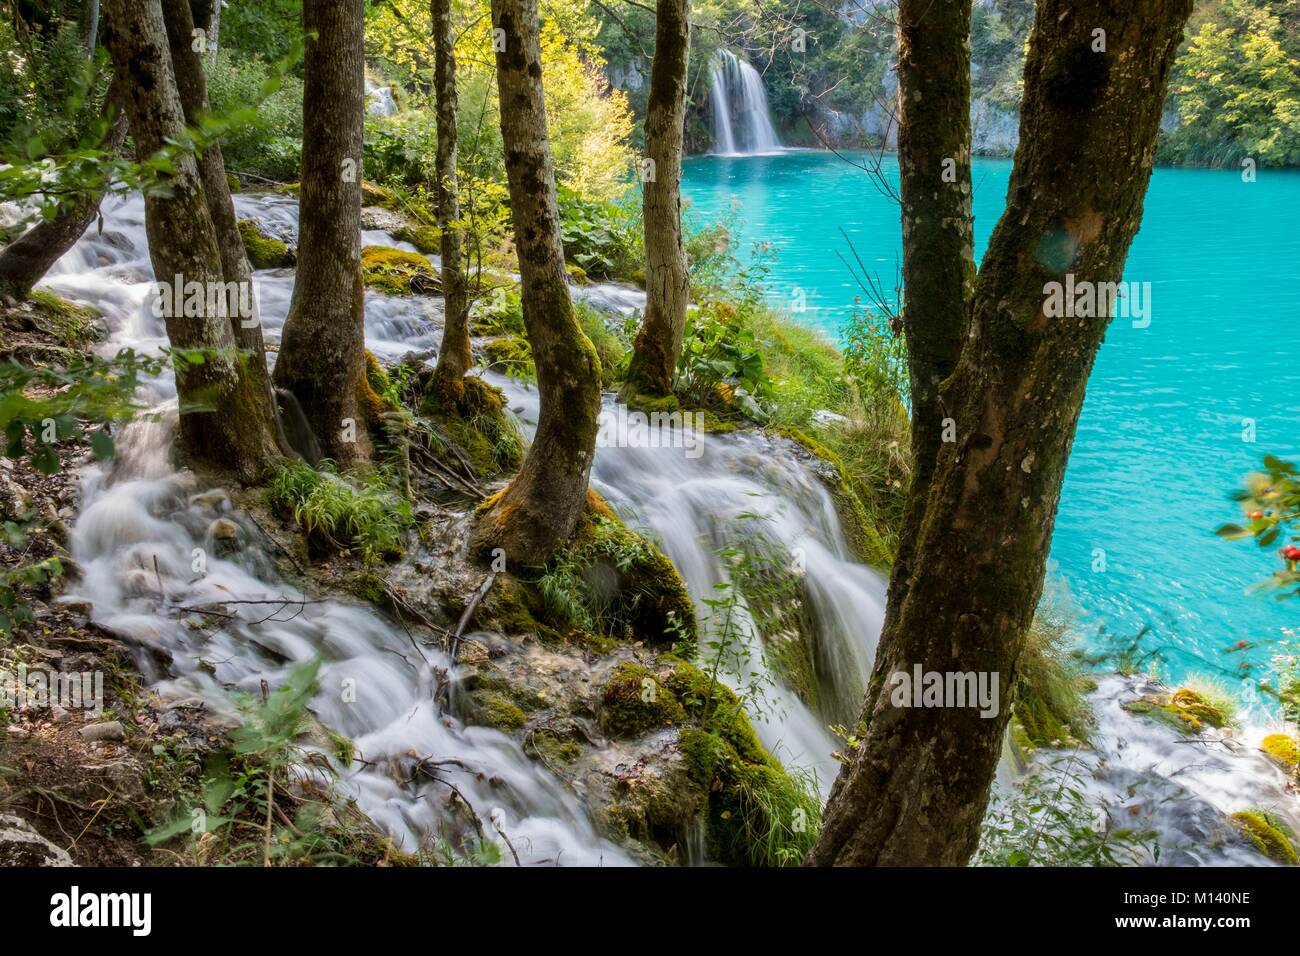 Croatia, North Dalmatia, Plitvice Lakes National Park listed as World Heritage by UNESCO, Lower lakes Stock Photo